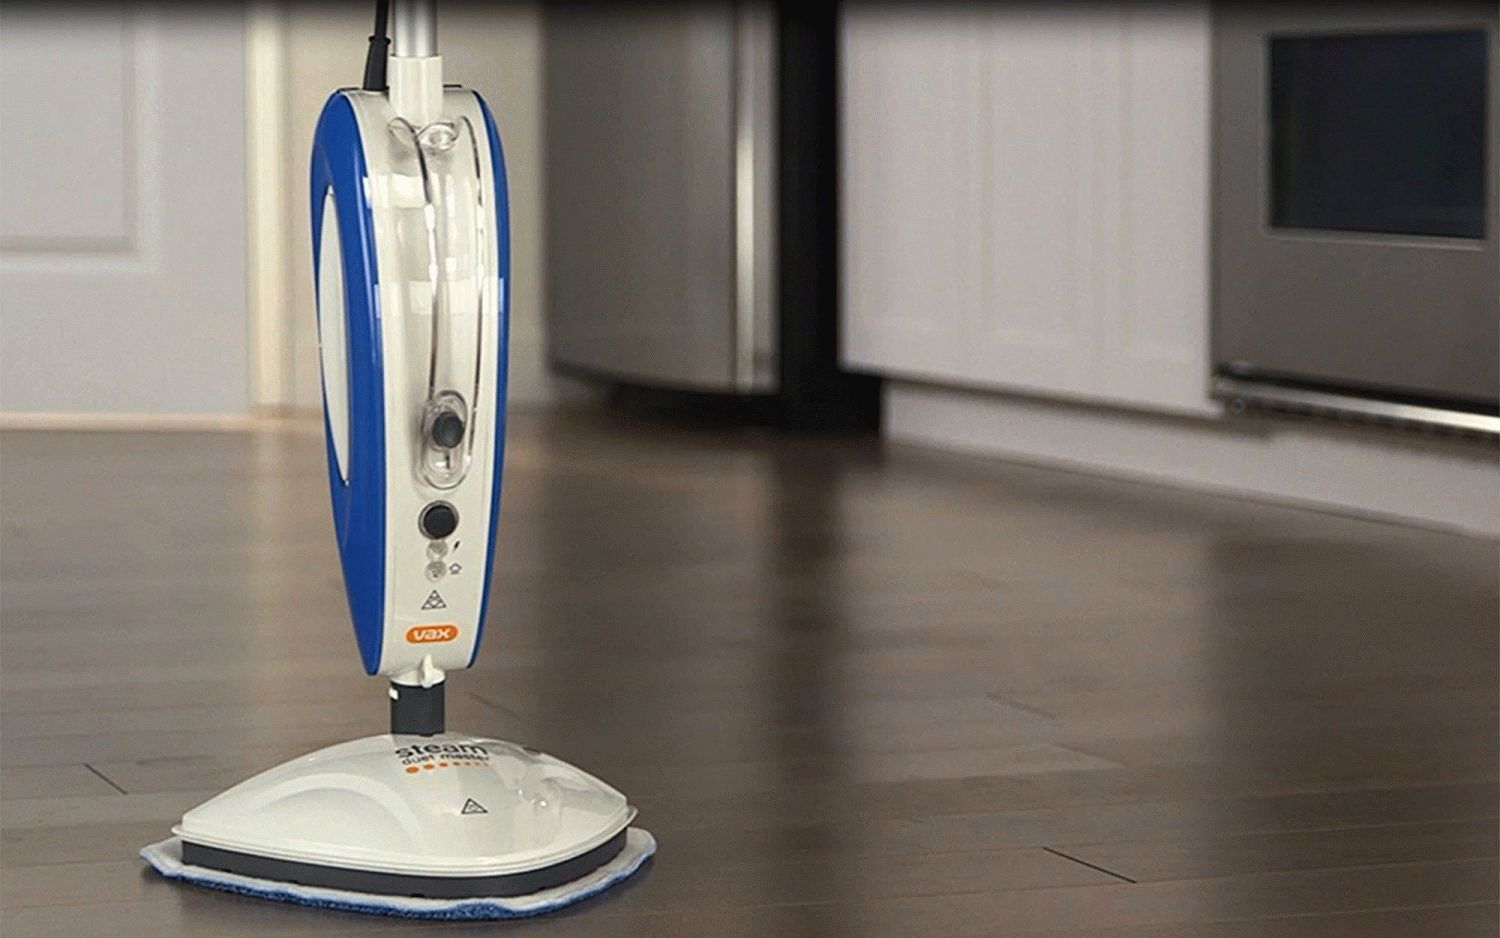 The best steam cleaners for the home in 2019